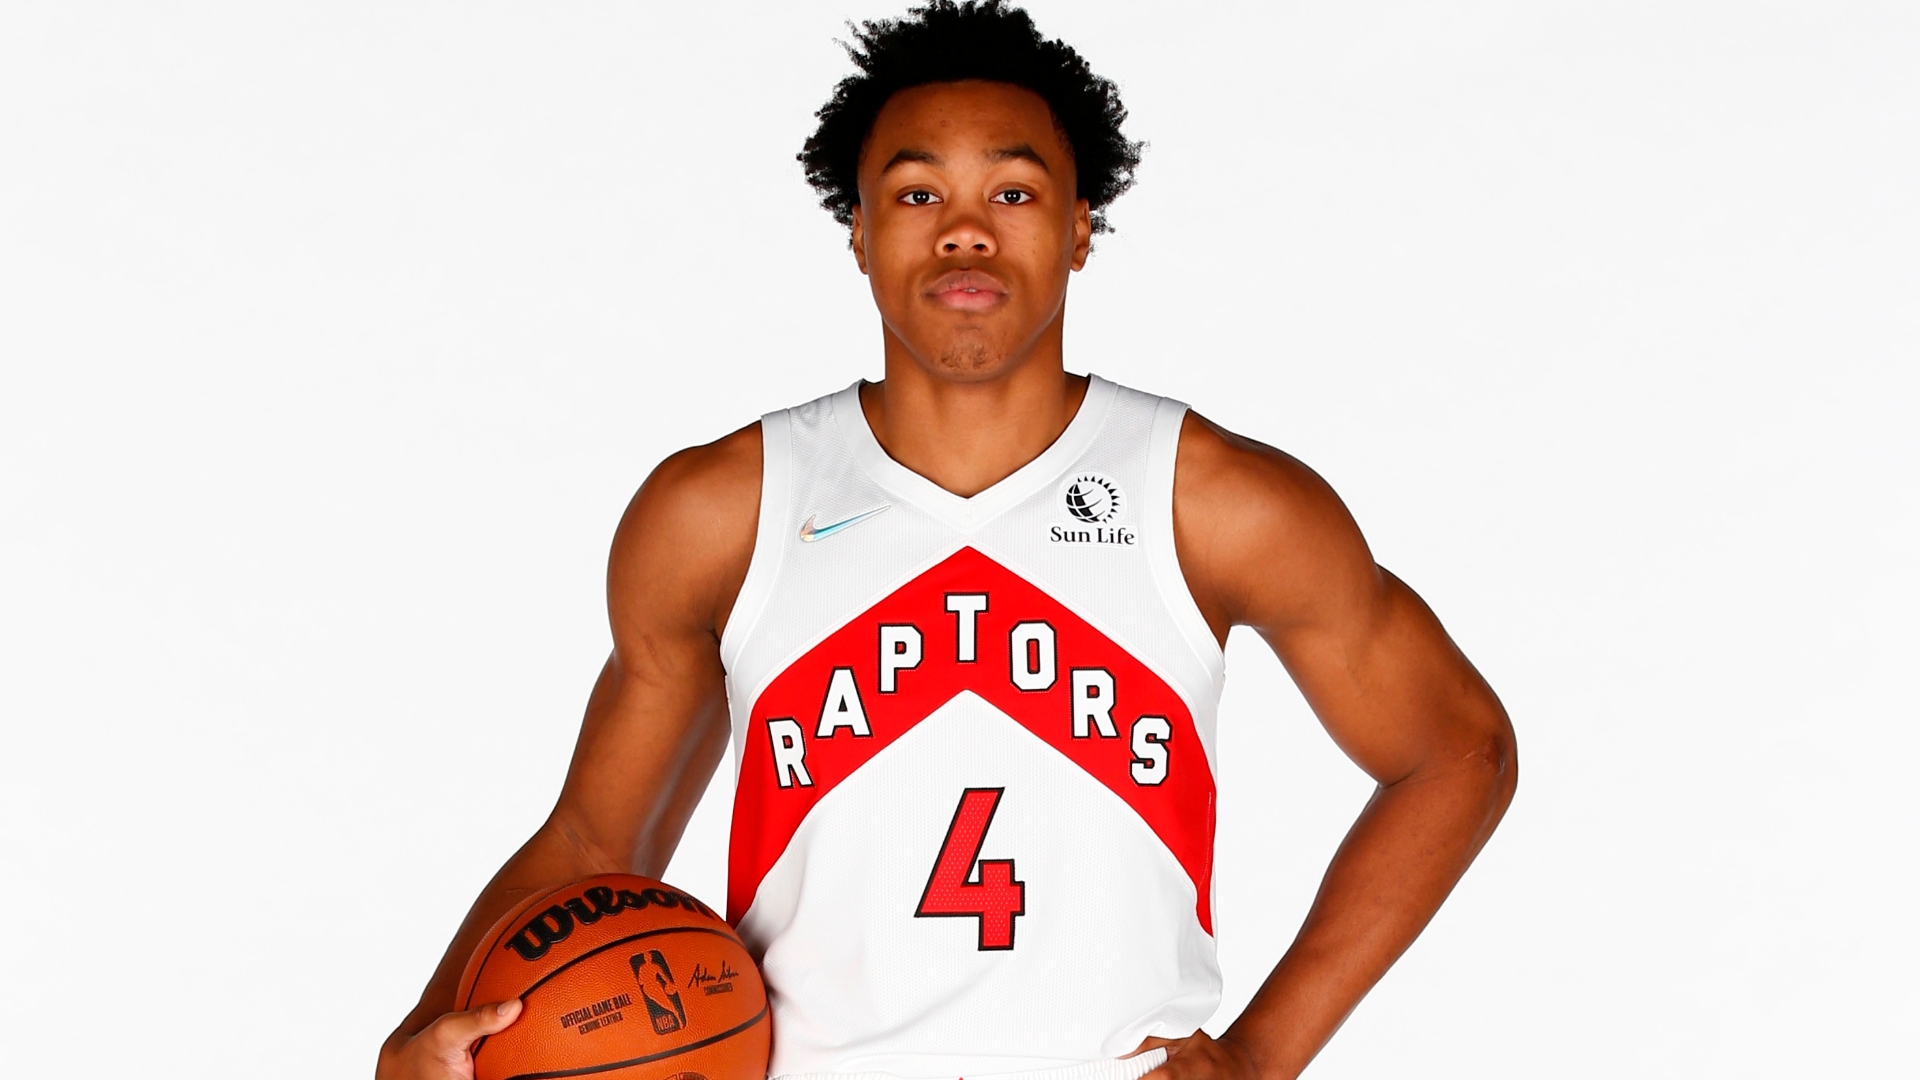 2021 22 Toronto Raptors Season Preview: Roster Changes, Depth Chart, Key Storylines And Games To Watch